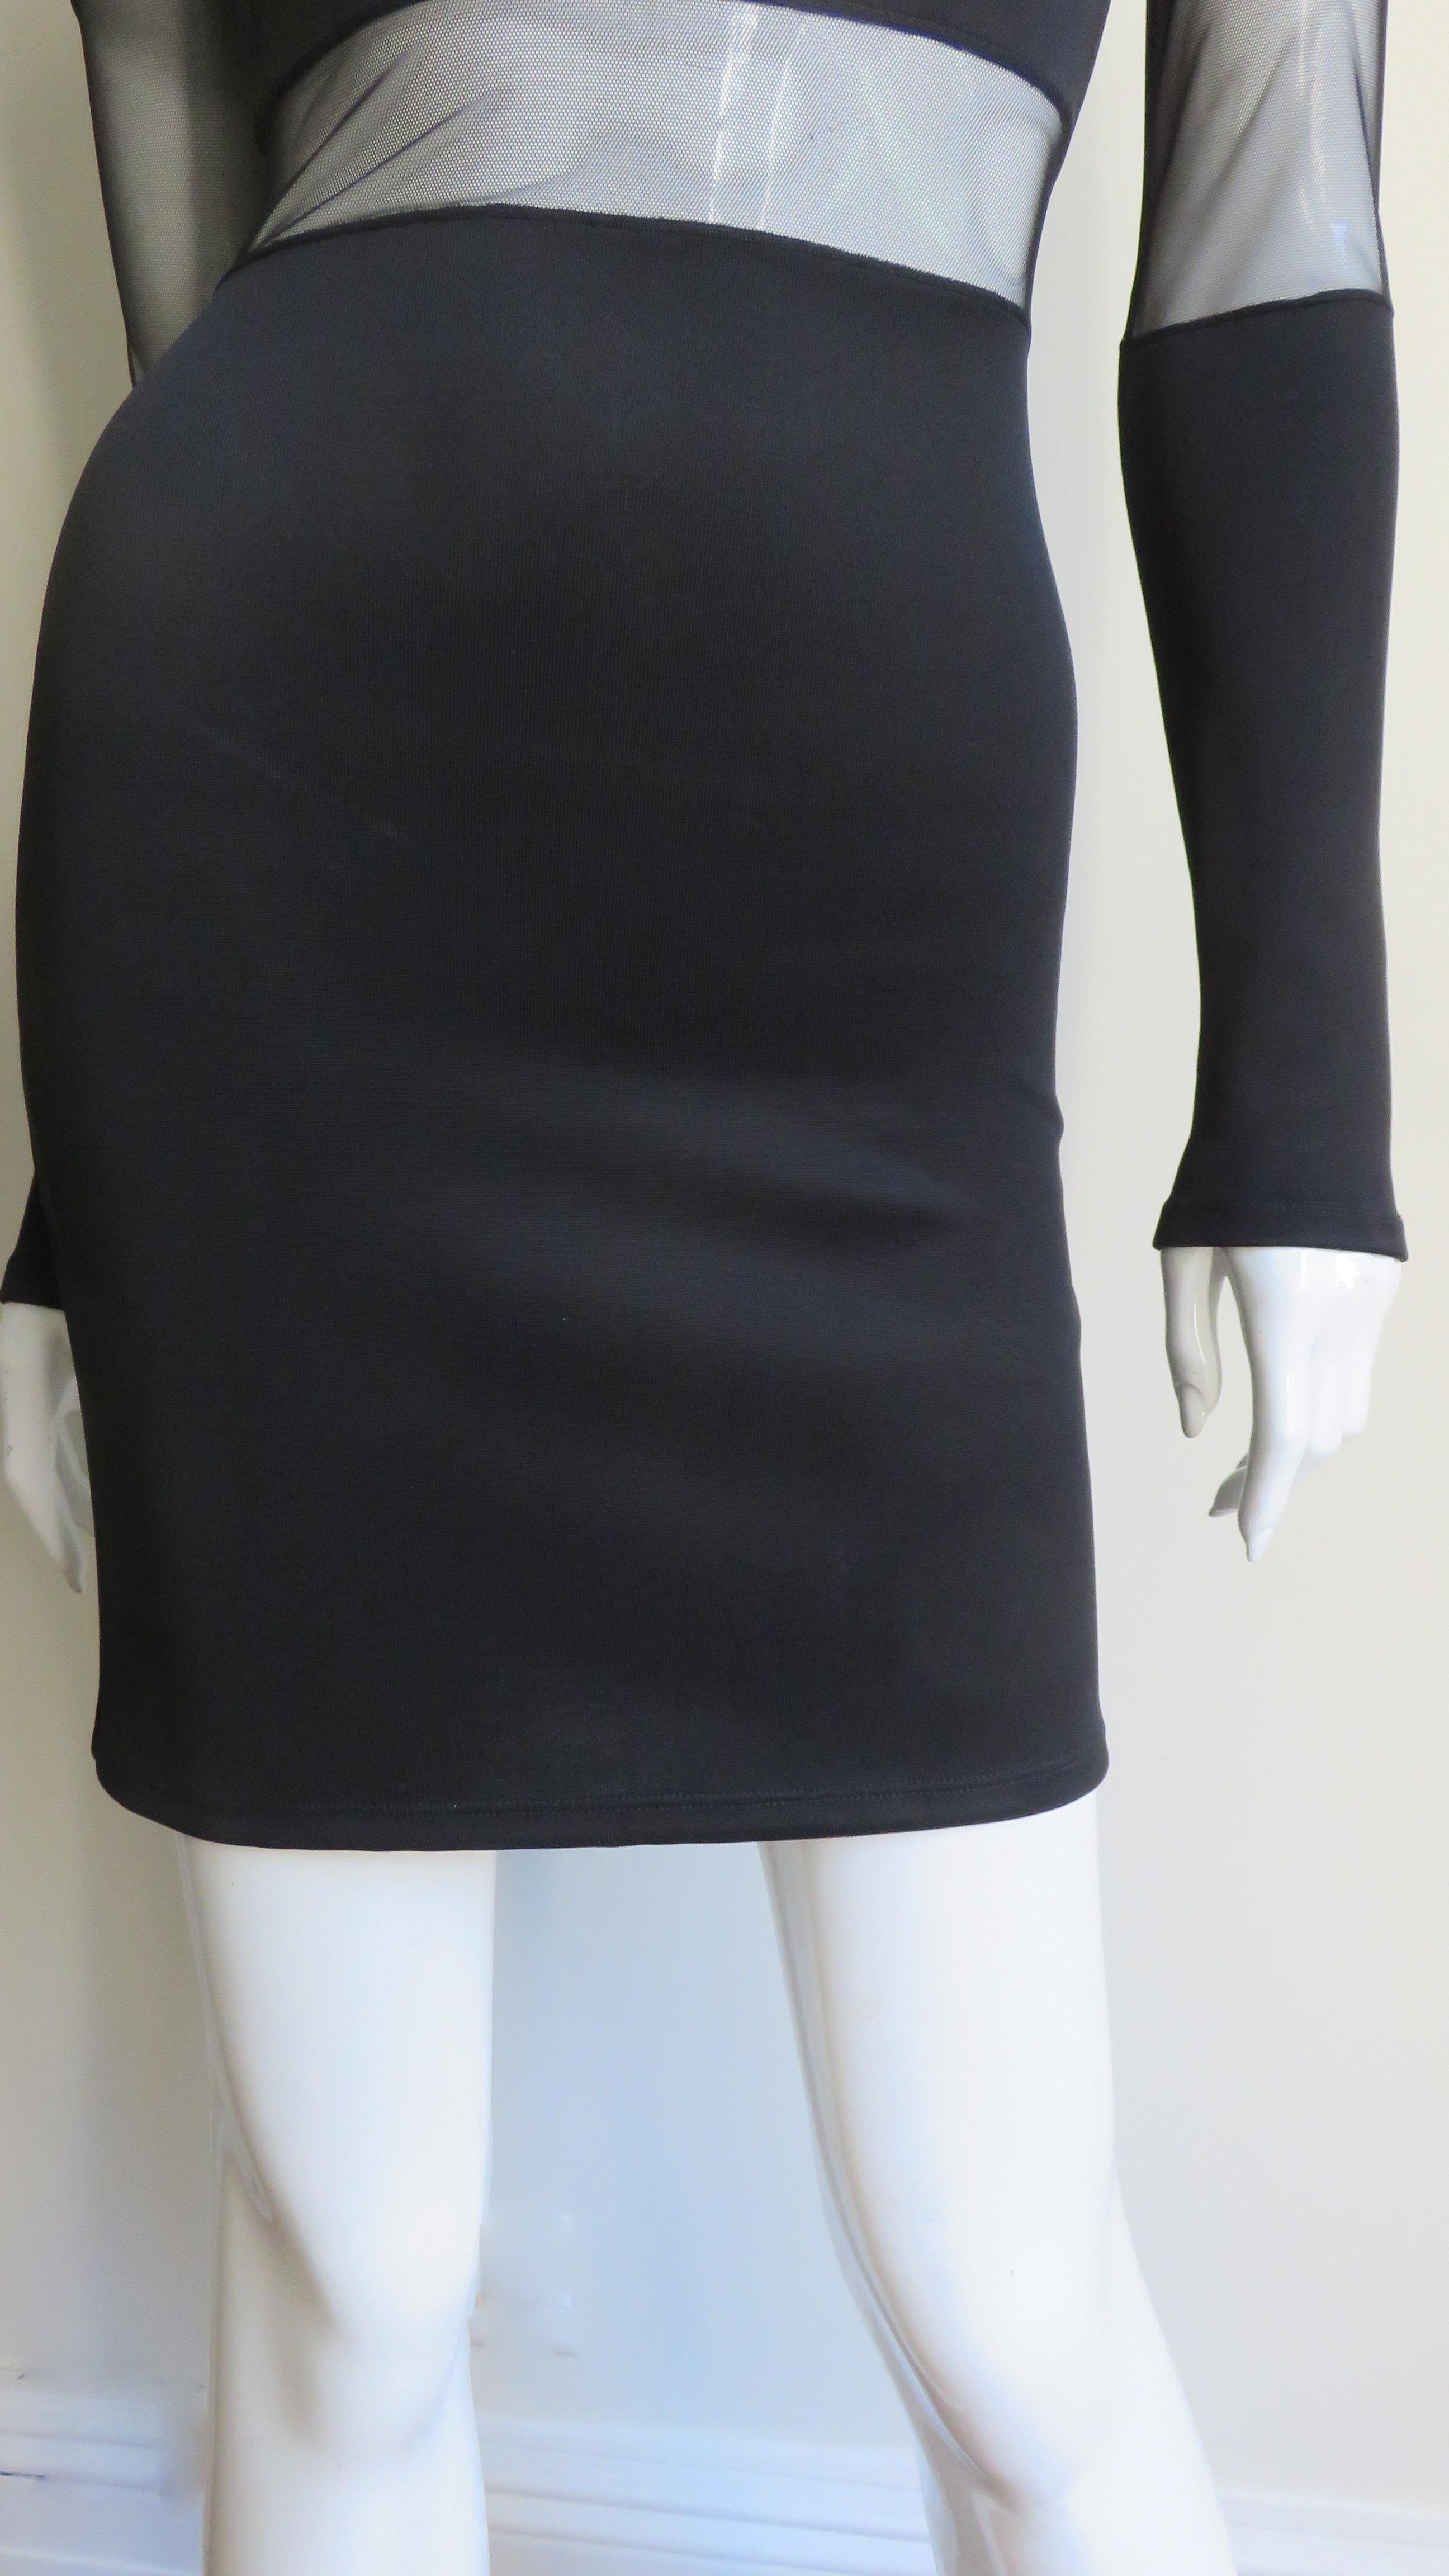 Pierre Balmain Bodycon Dress with Sheer Shoulders and Waist In Excellent Condition For Sale In Water Mill, NY